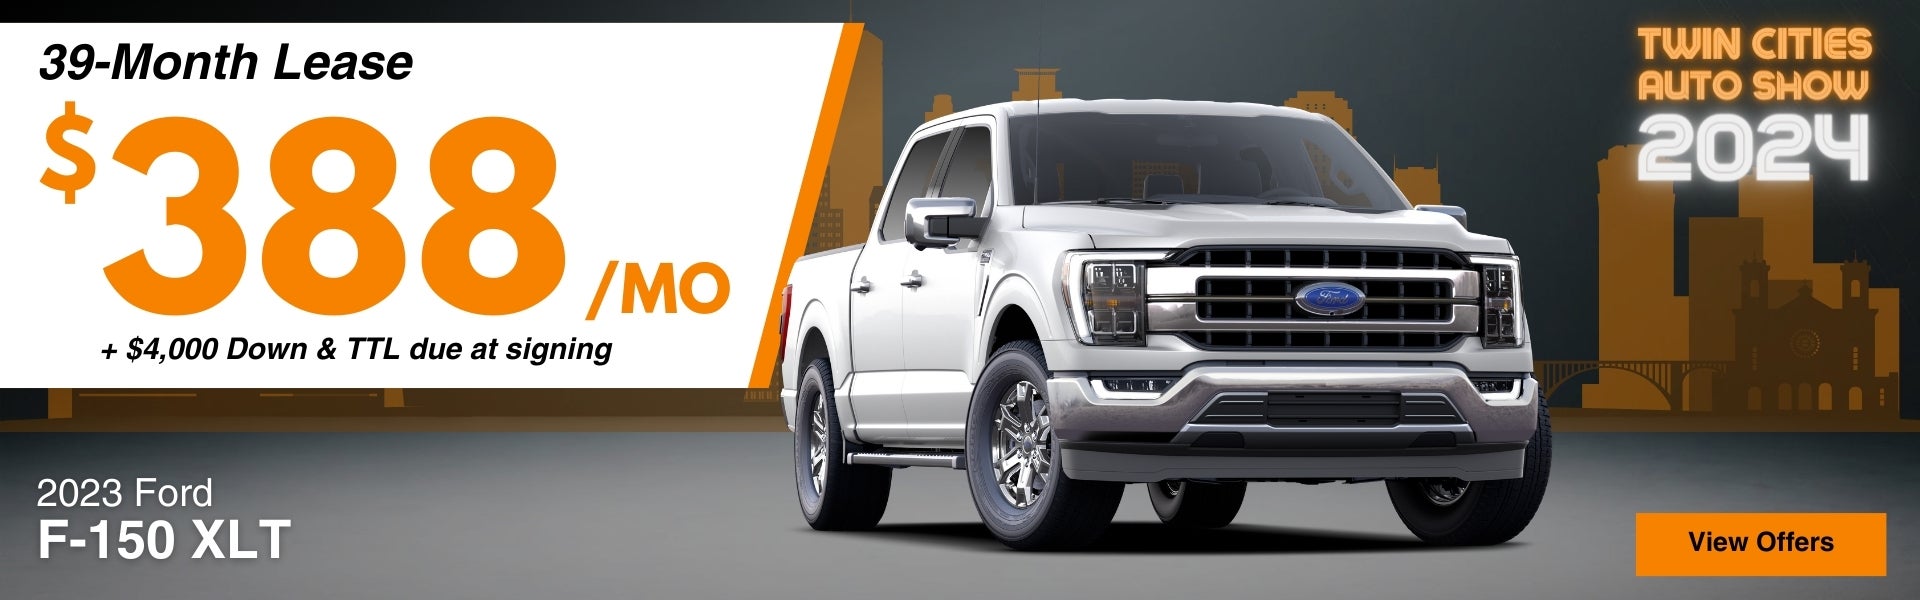 Ford F-150 Lease Offer